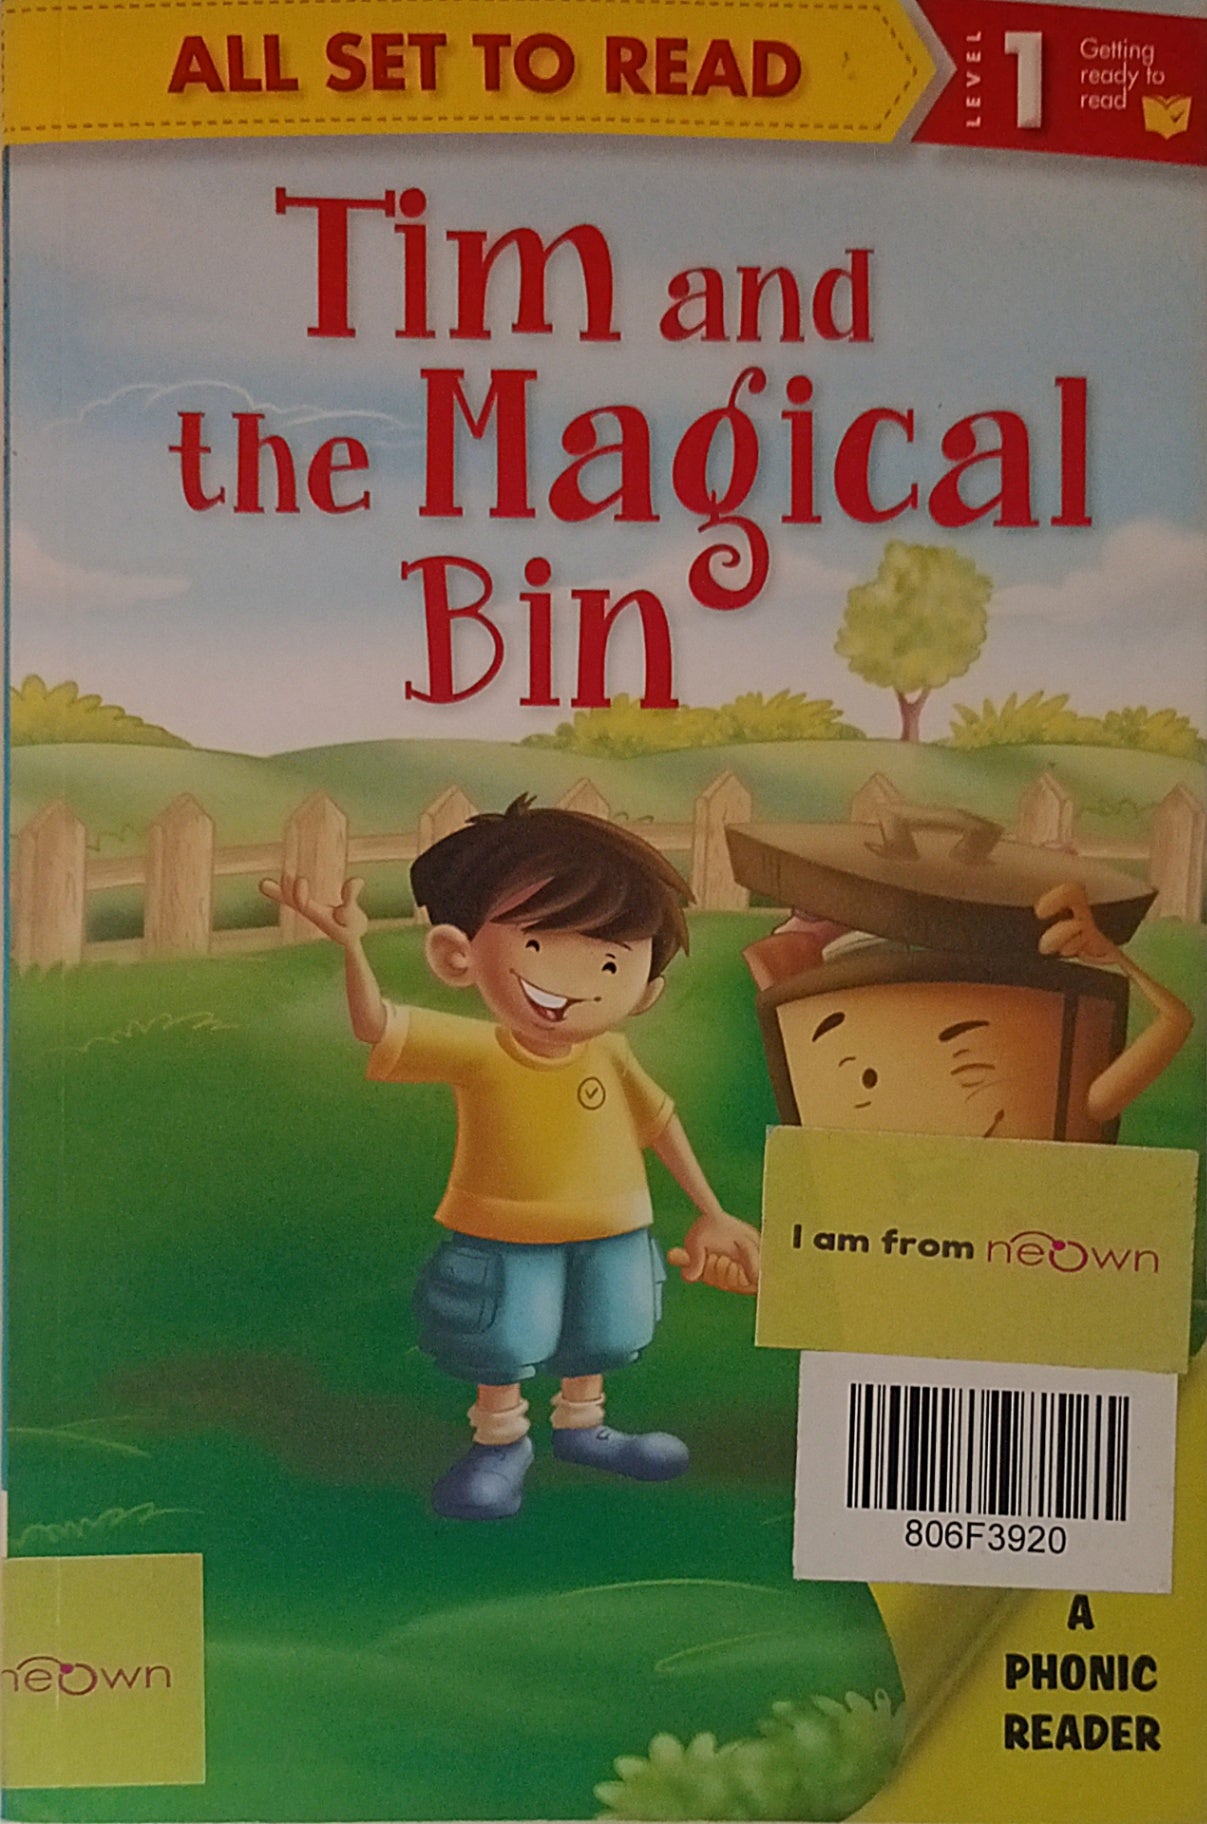 All Set to Read-Tim and Magical Bin